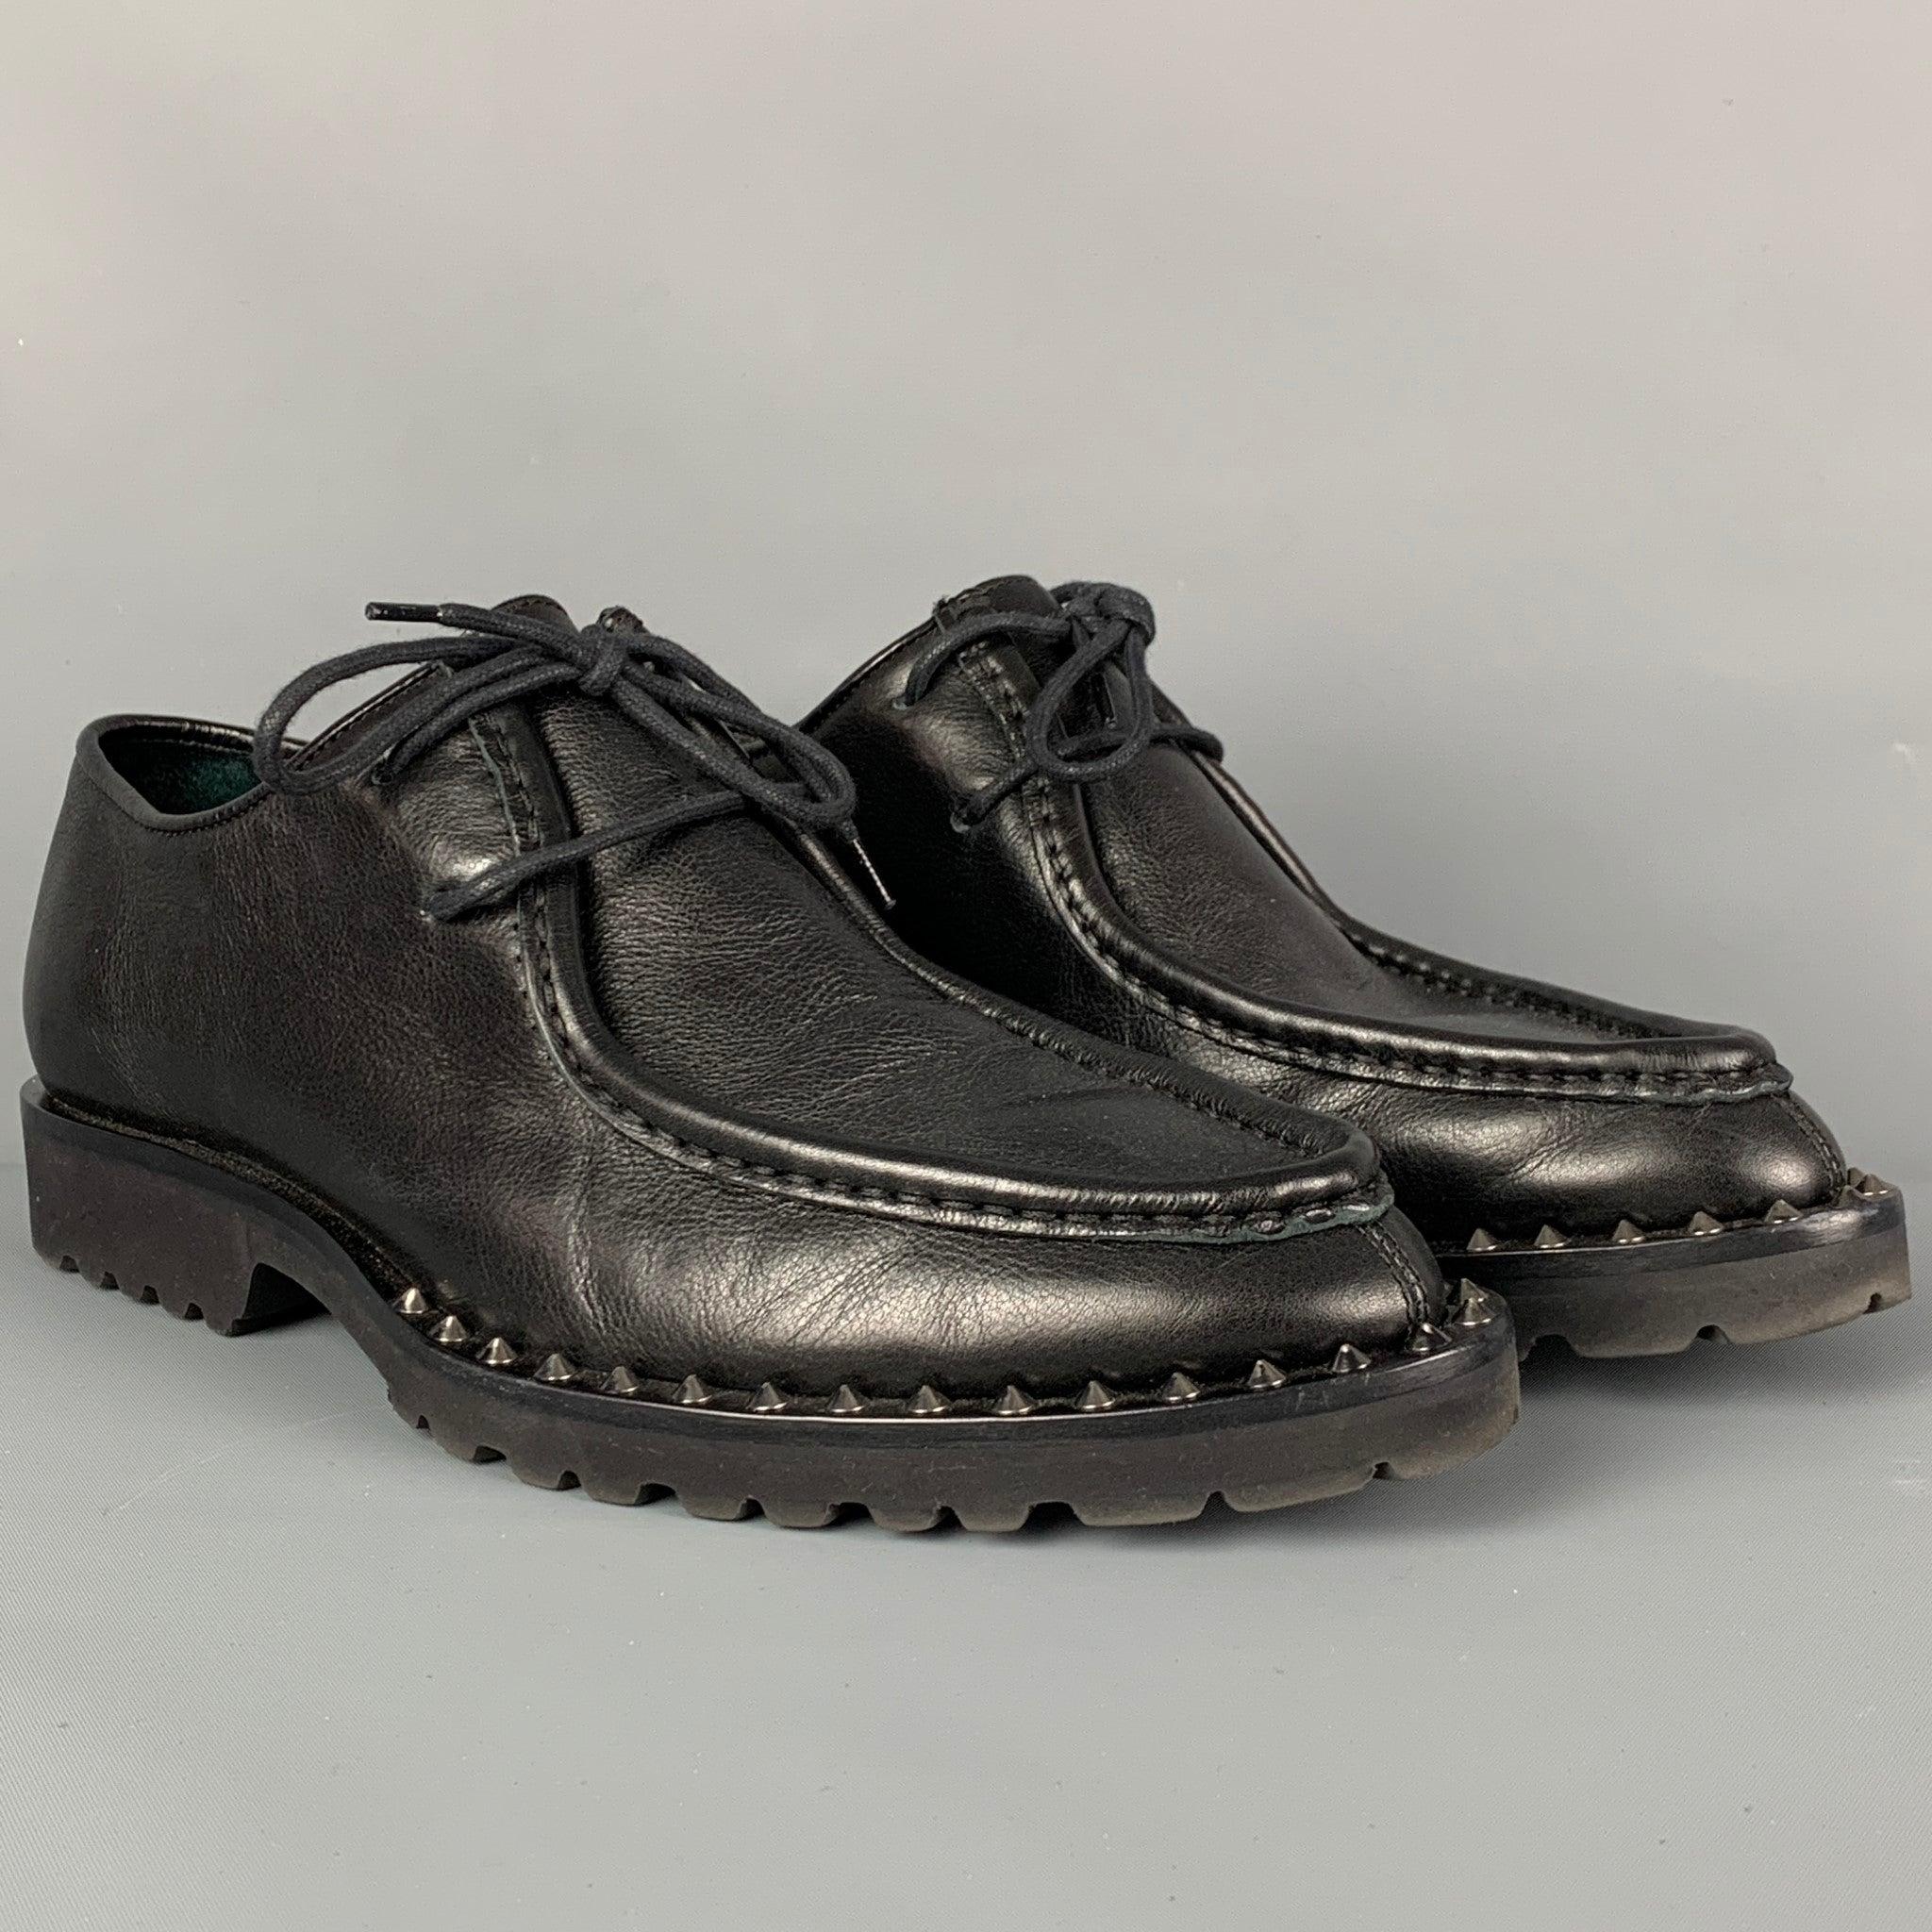 DSQUARED2 'Worlds End' shoes comes in a black leather featuring studded details, narrow toe, and a lace up closure. Includes box. Made in Italy.
Excellent
Pre-Owned Condition. 

Marked:  
39Outsole: 11.75 inches  x 4.25 inches 
  
  
 
Reference: